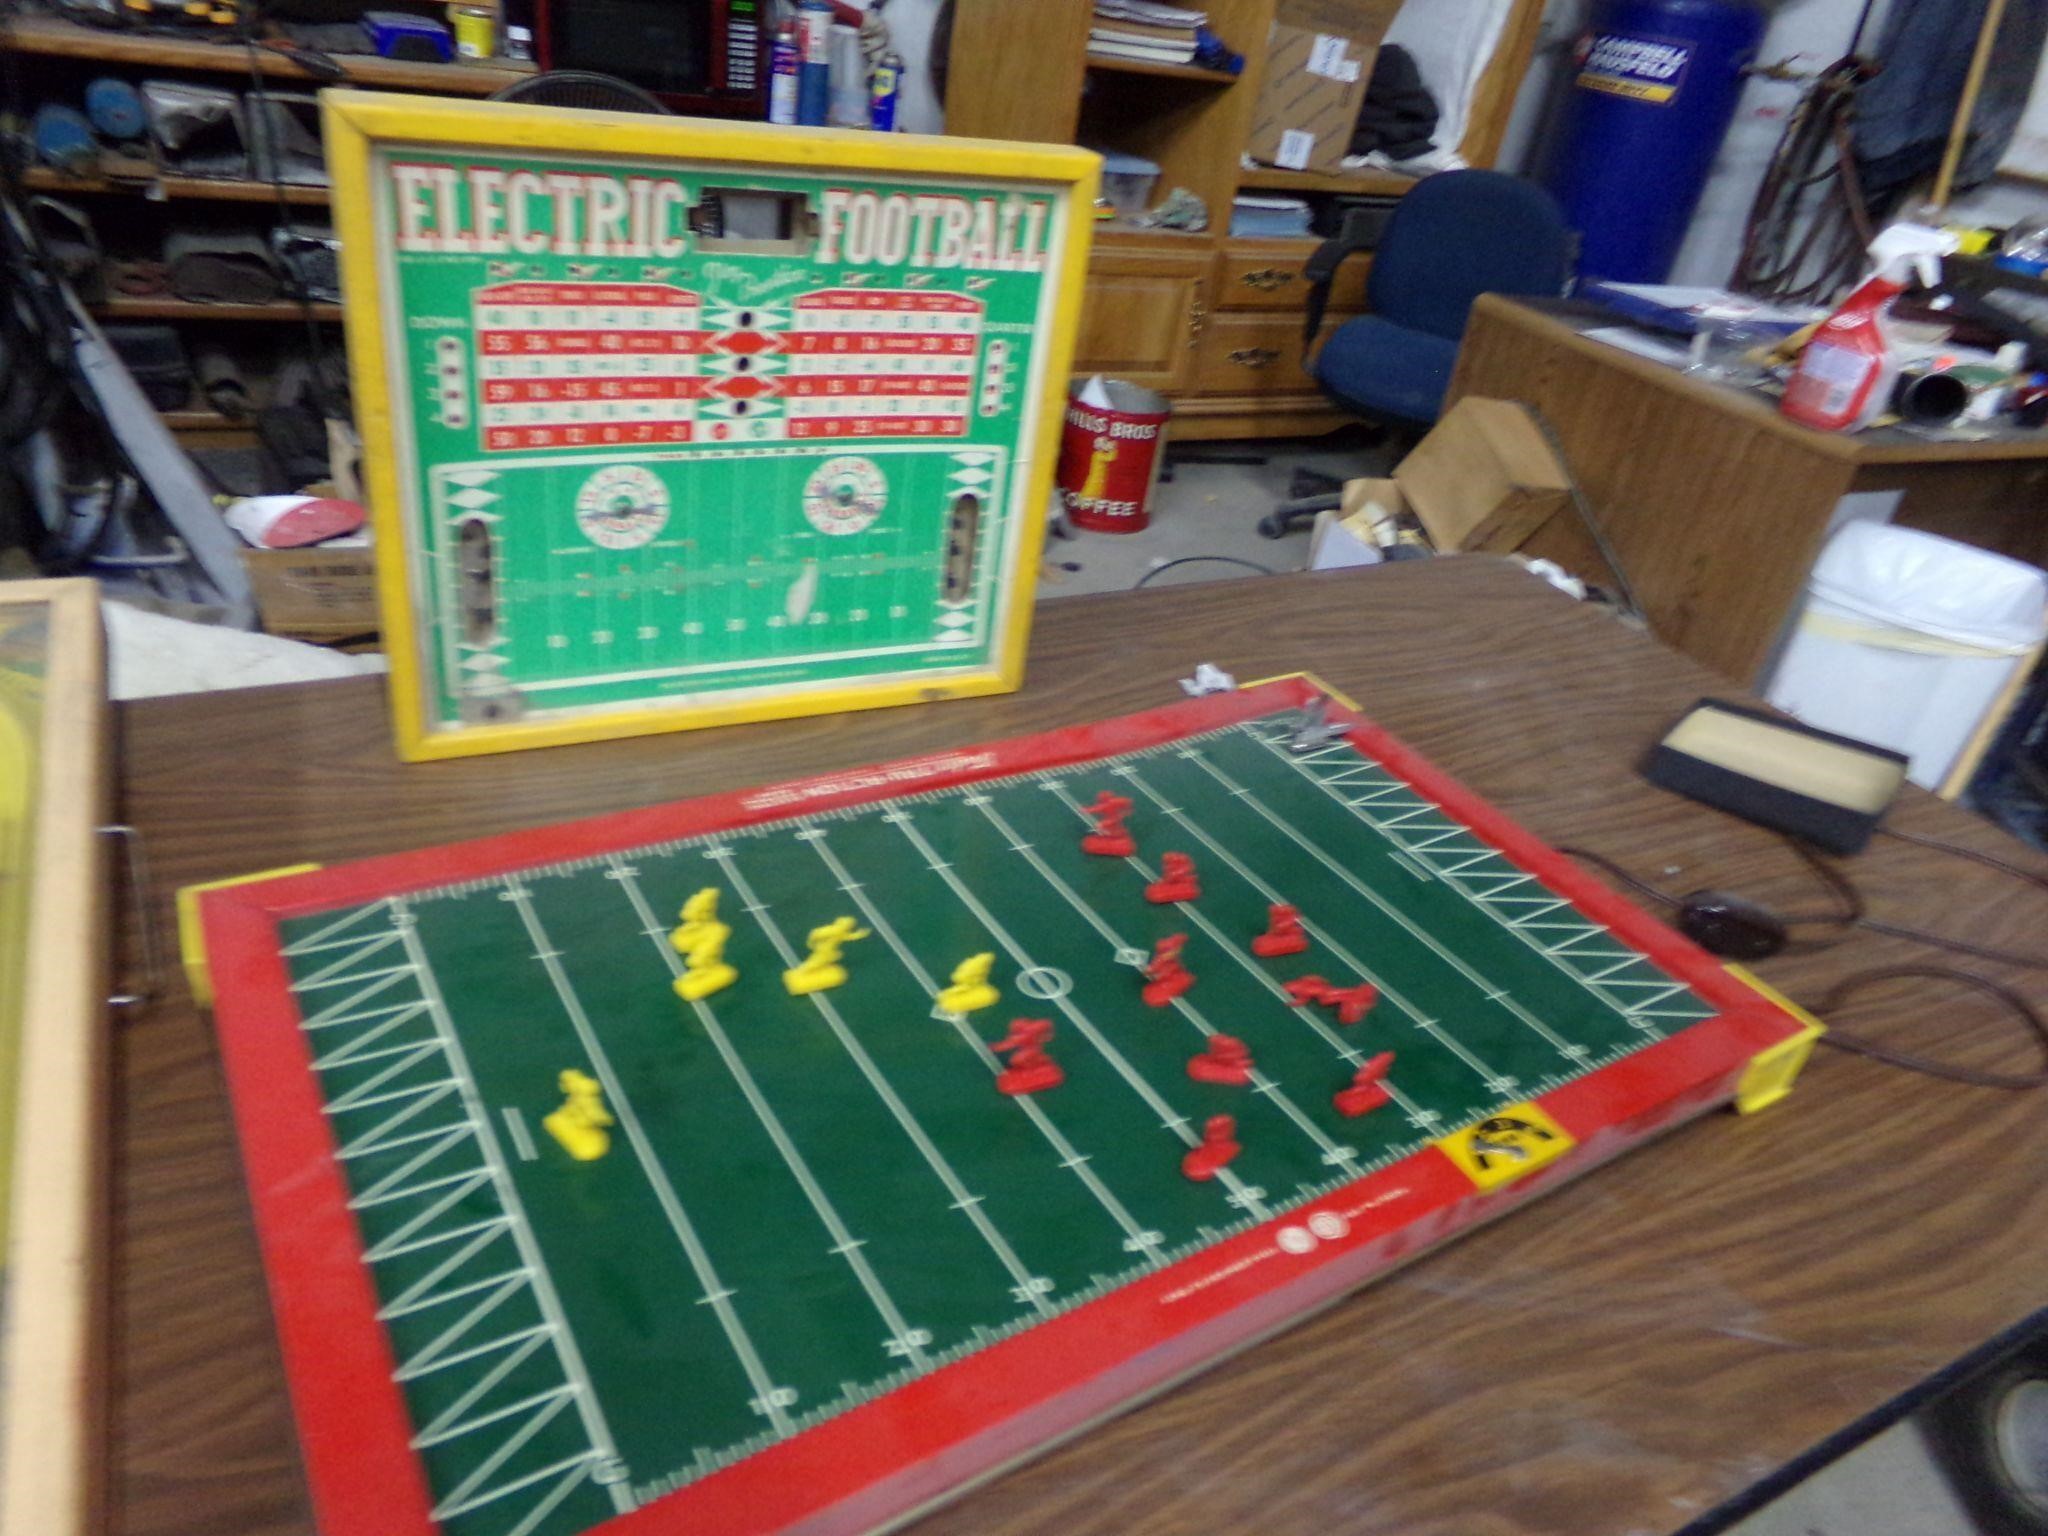 Vintage electric football game